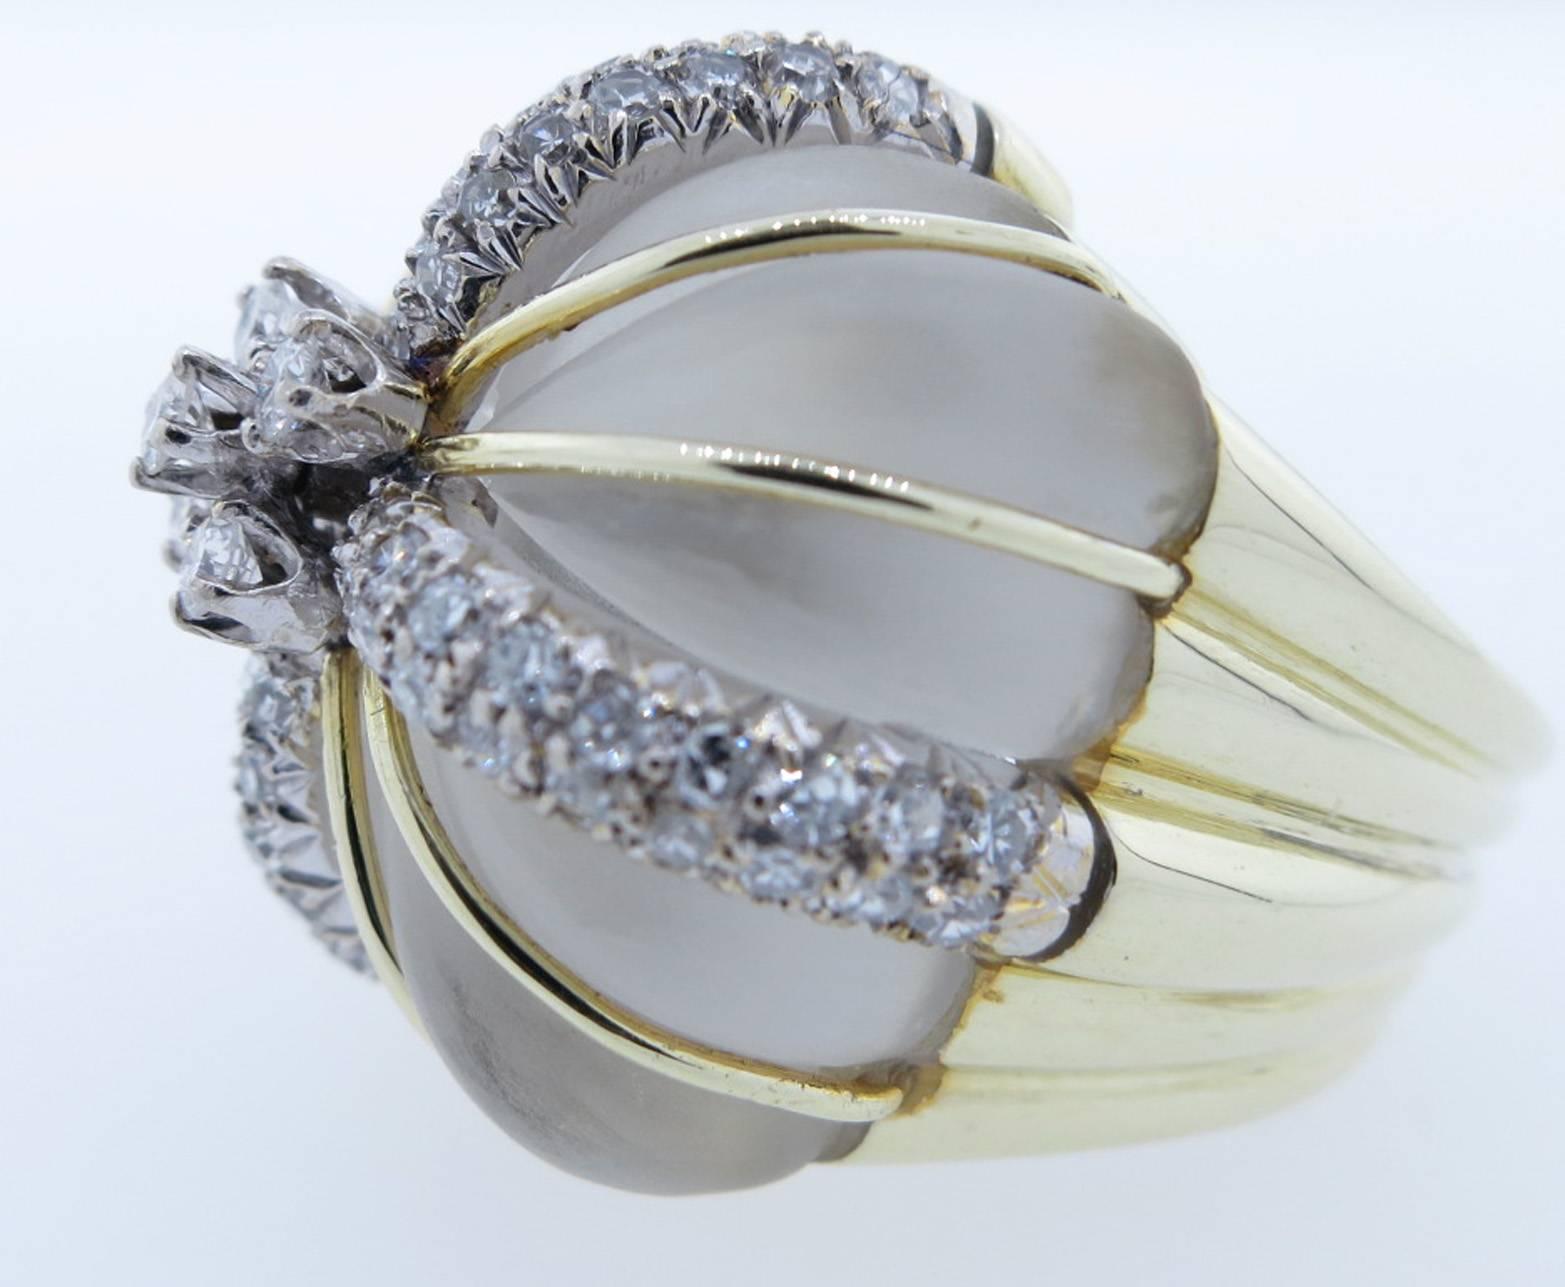 14kt. yellow gold mounted dome ring set with a fluted rock crystal and bead and prong set in white gold with 81 round diamonds totaling approx 1.0 cts. Size 6 and can be sized. Circa 1960.